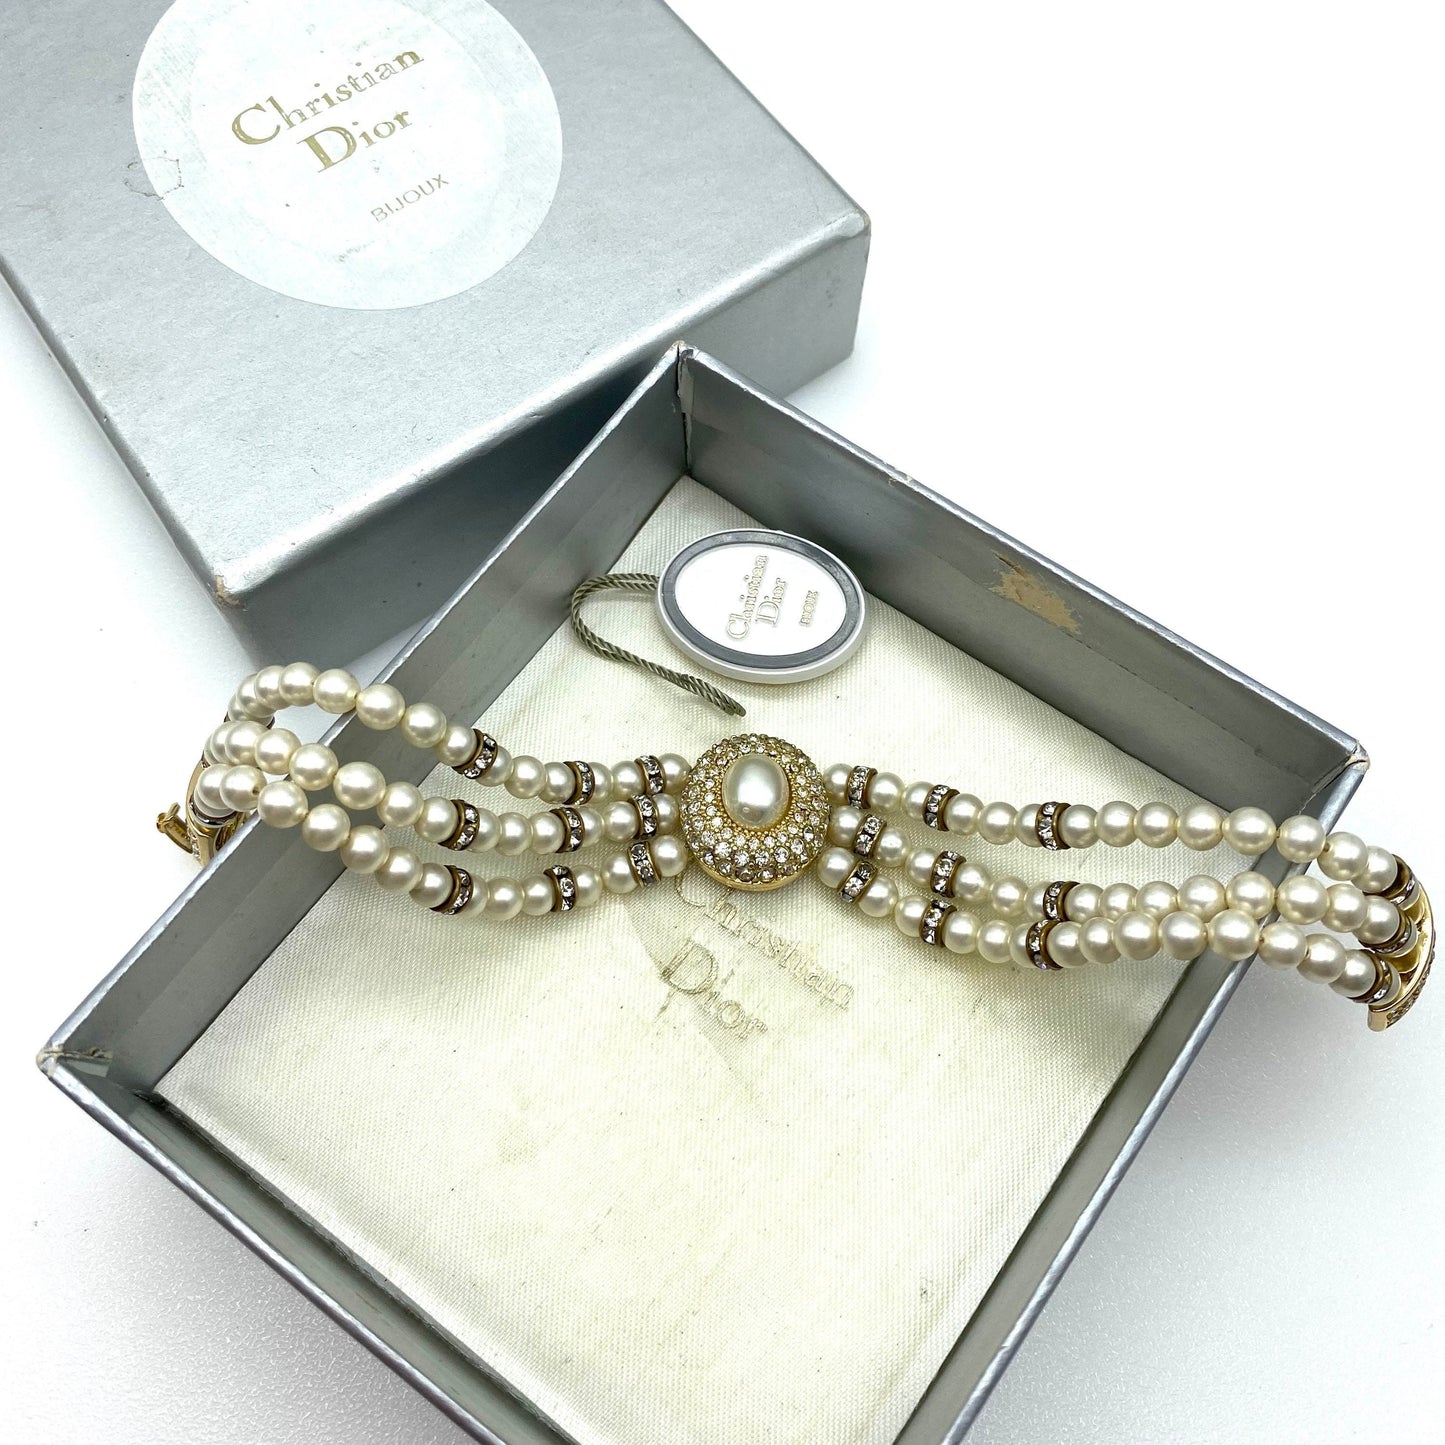 Three Strand Christian Dior Faux Pearl and Crystal Bracelet in a Christian Dior Bijoux Box with Bijoux Tag